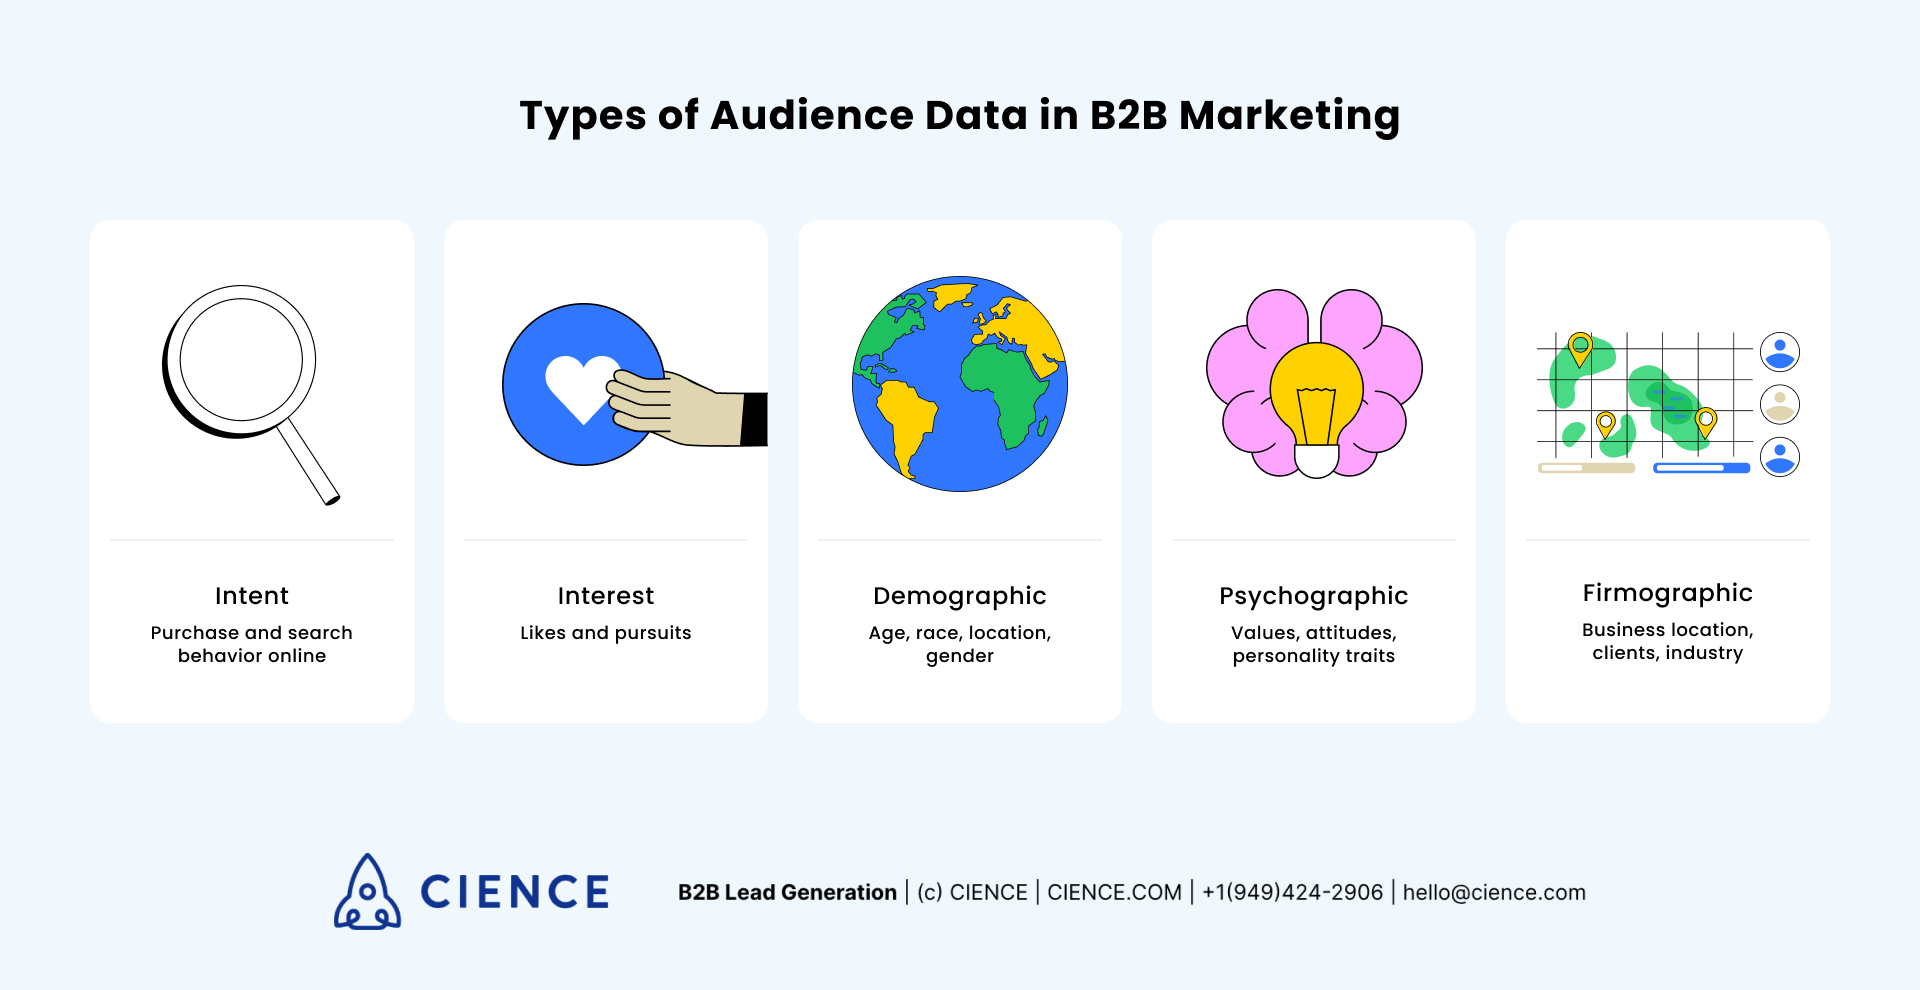 Audience Data Types: Intent, Interest, Demographic, Psychographic, Frimographic